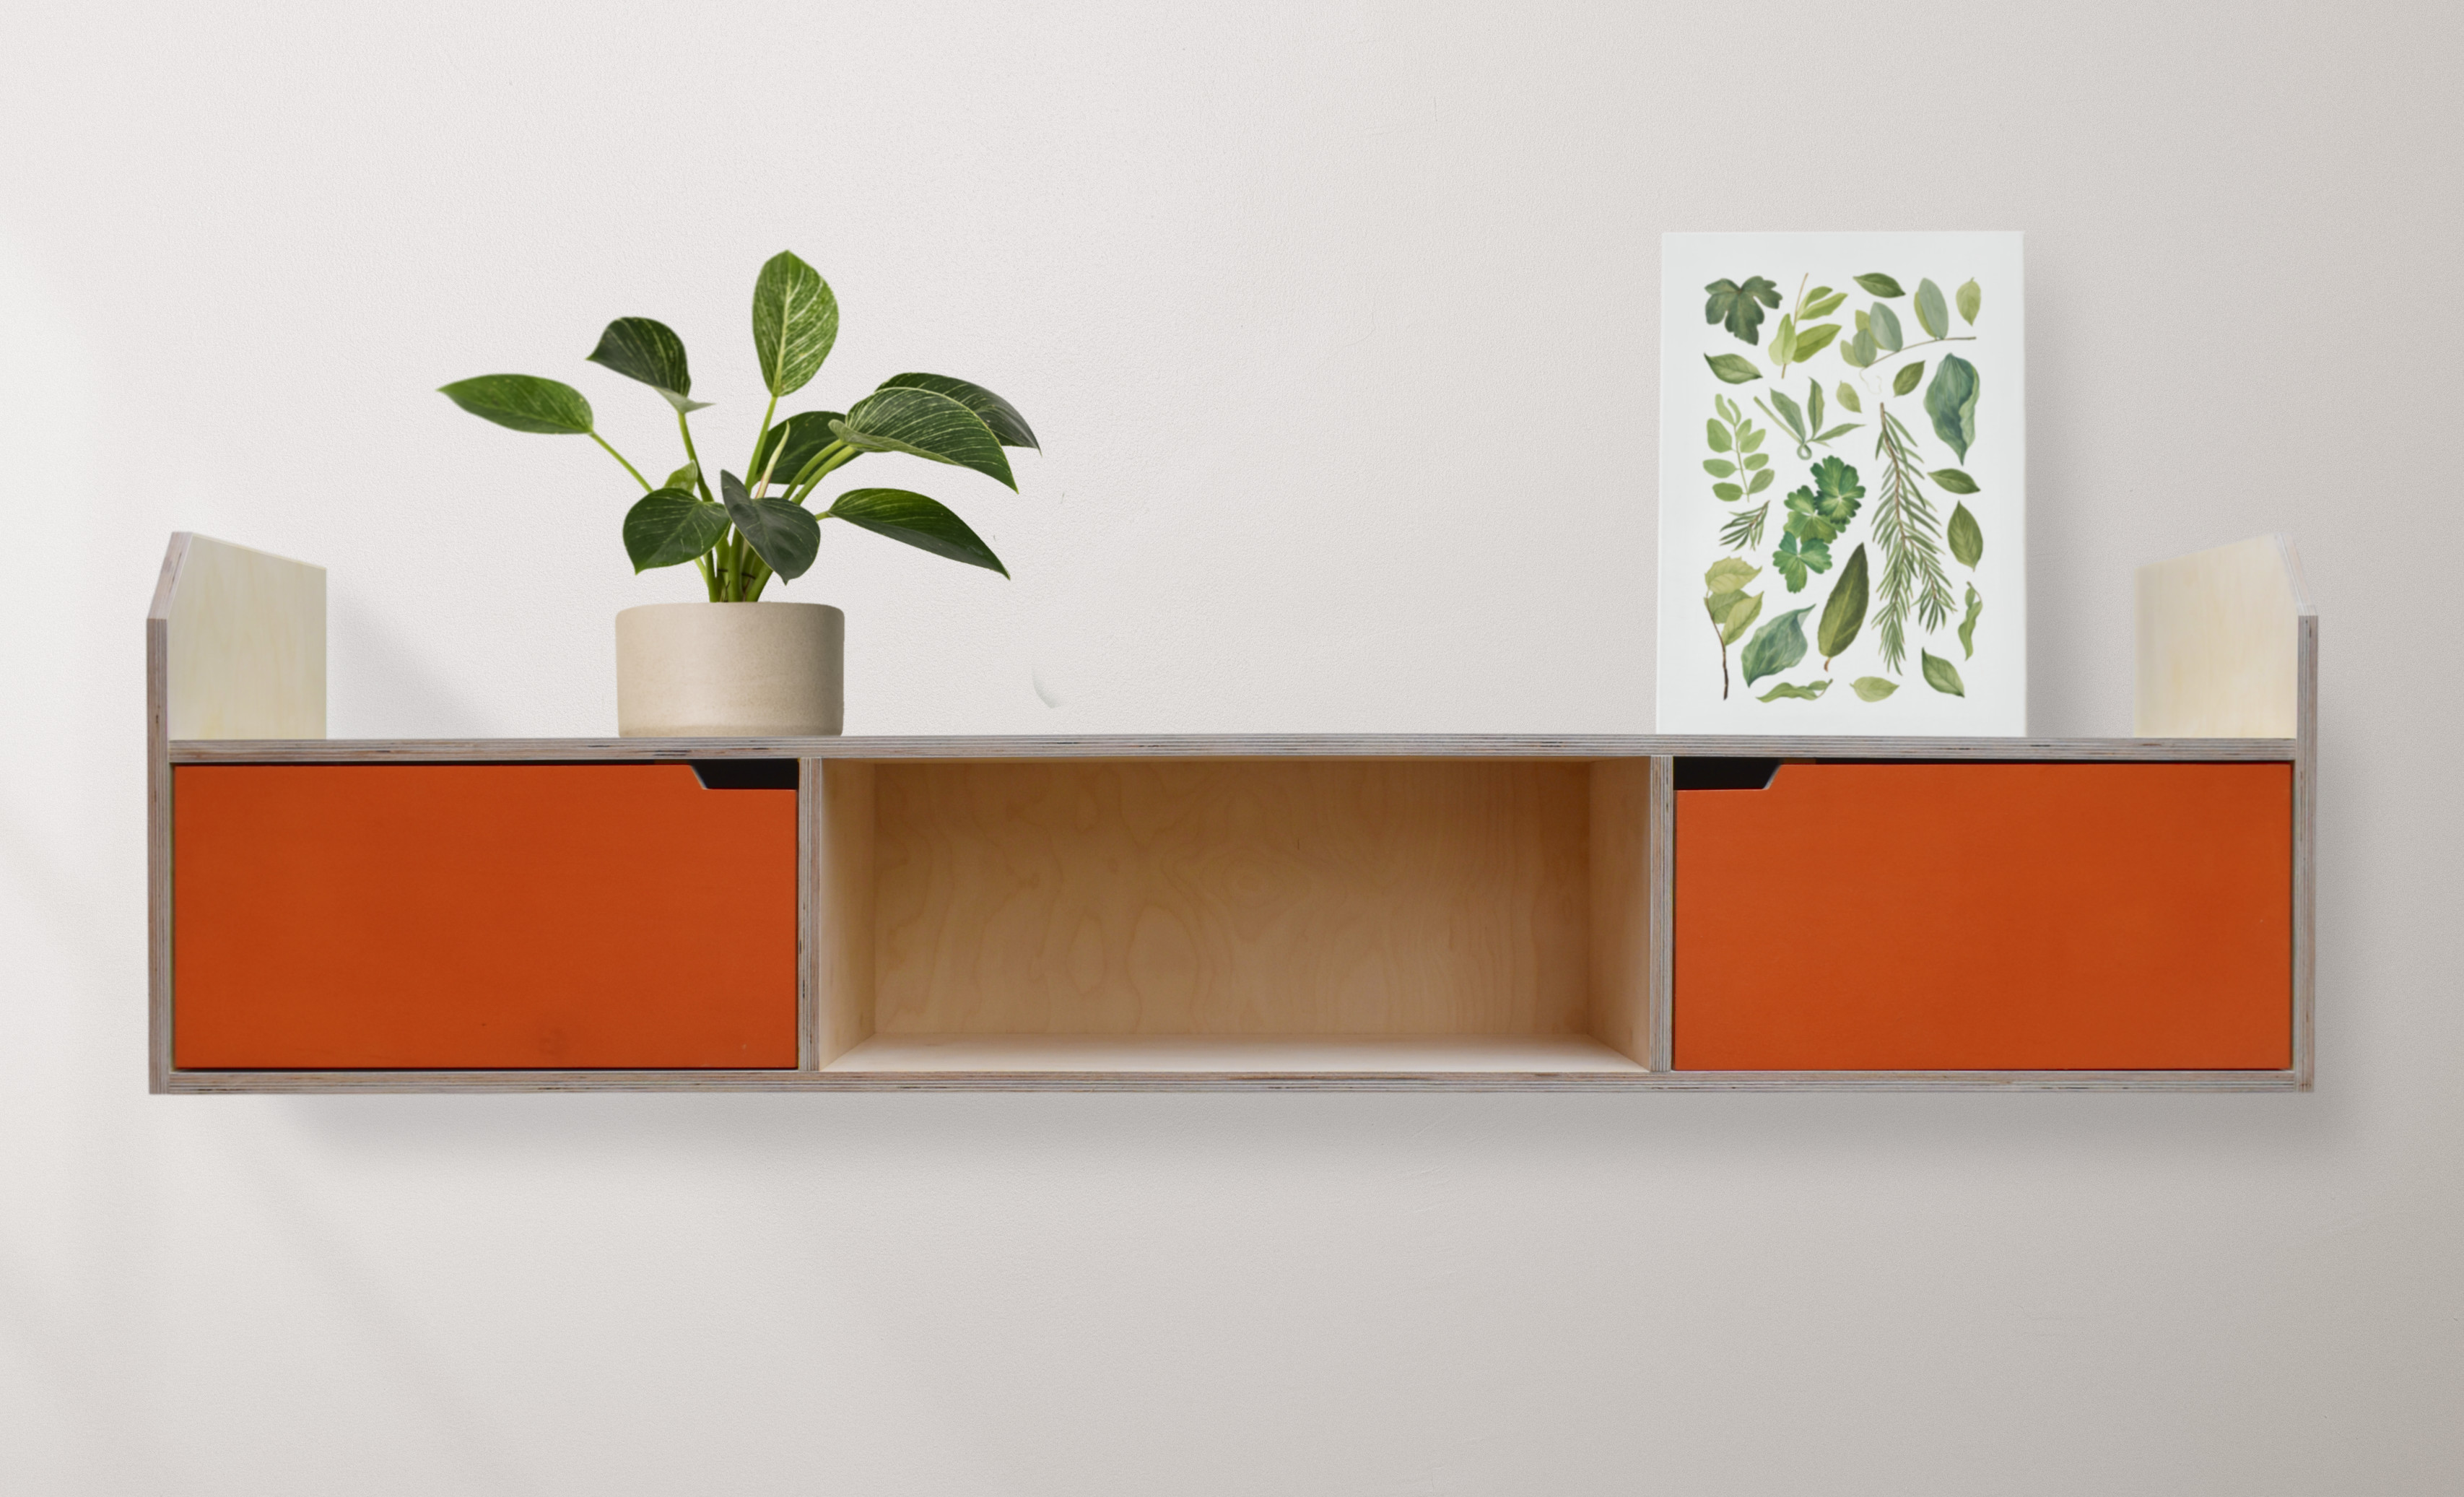 Mmh Furniture 'Horizontal' cabinet birch plywood cabinet with items displayed on the top